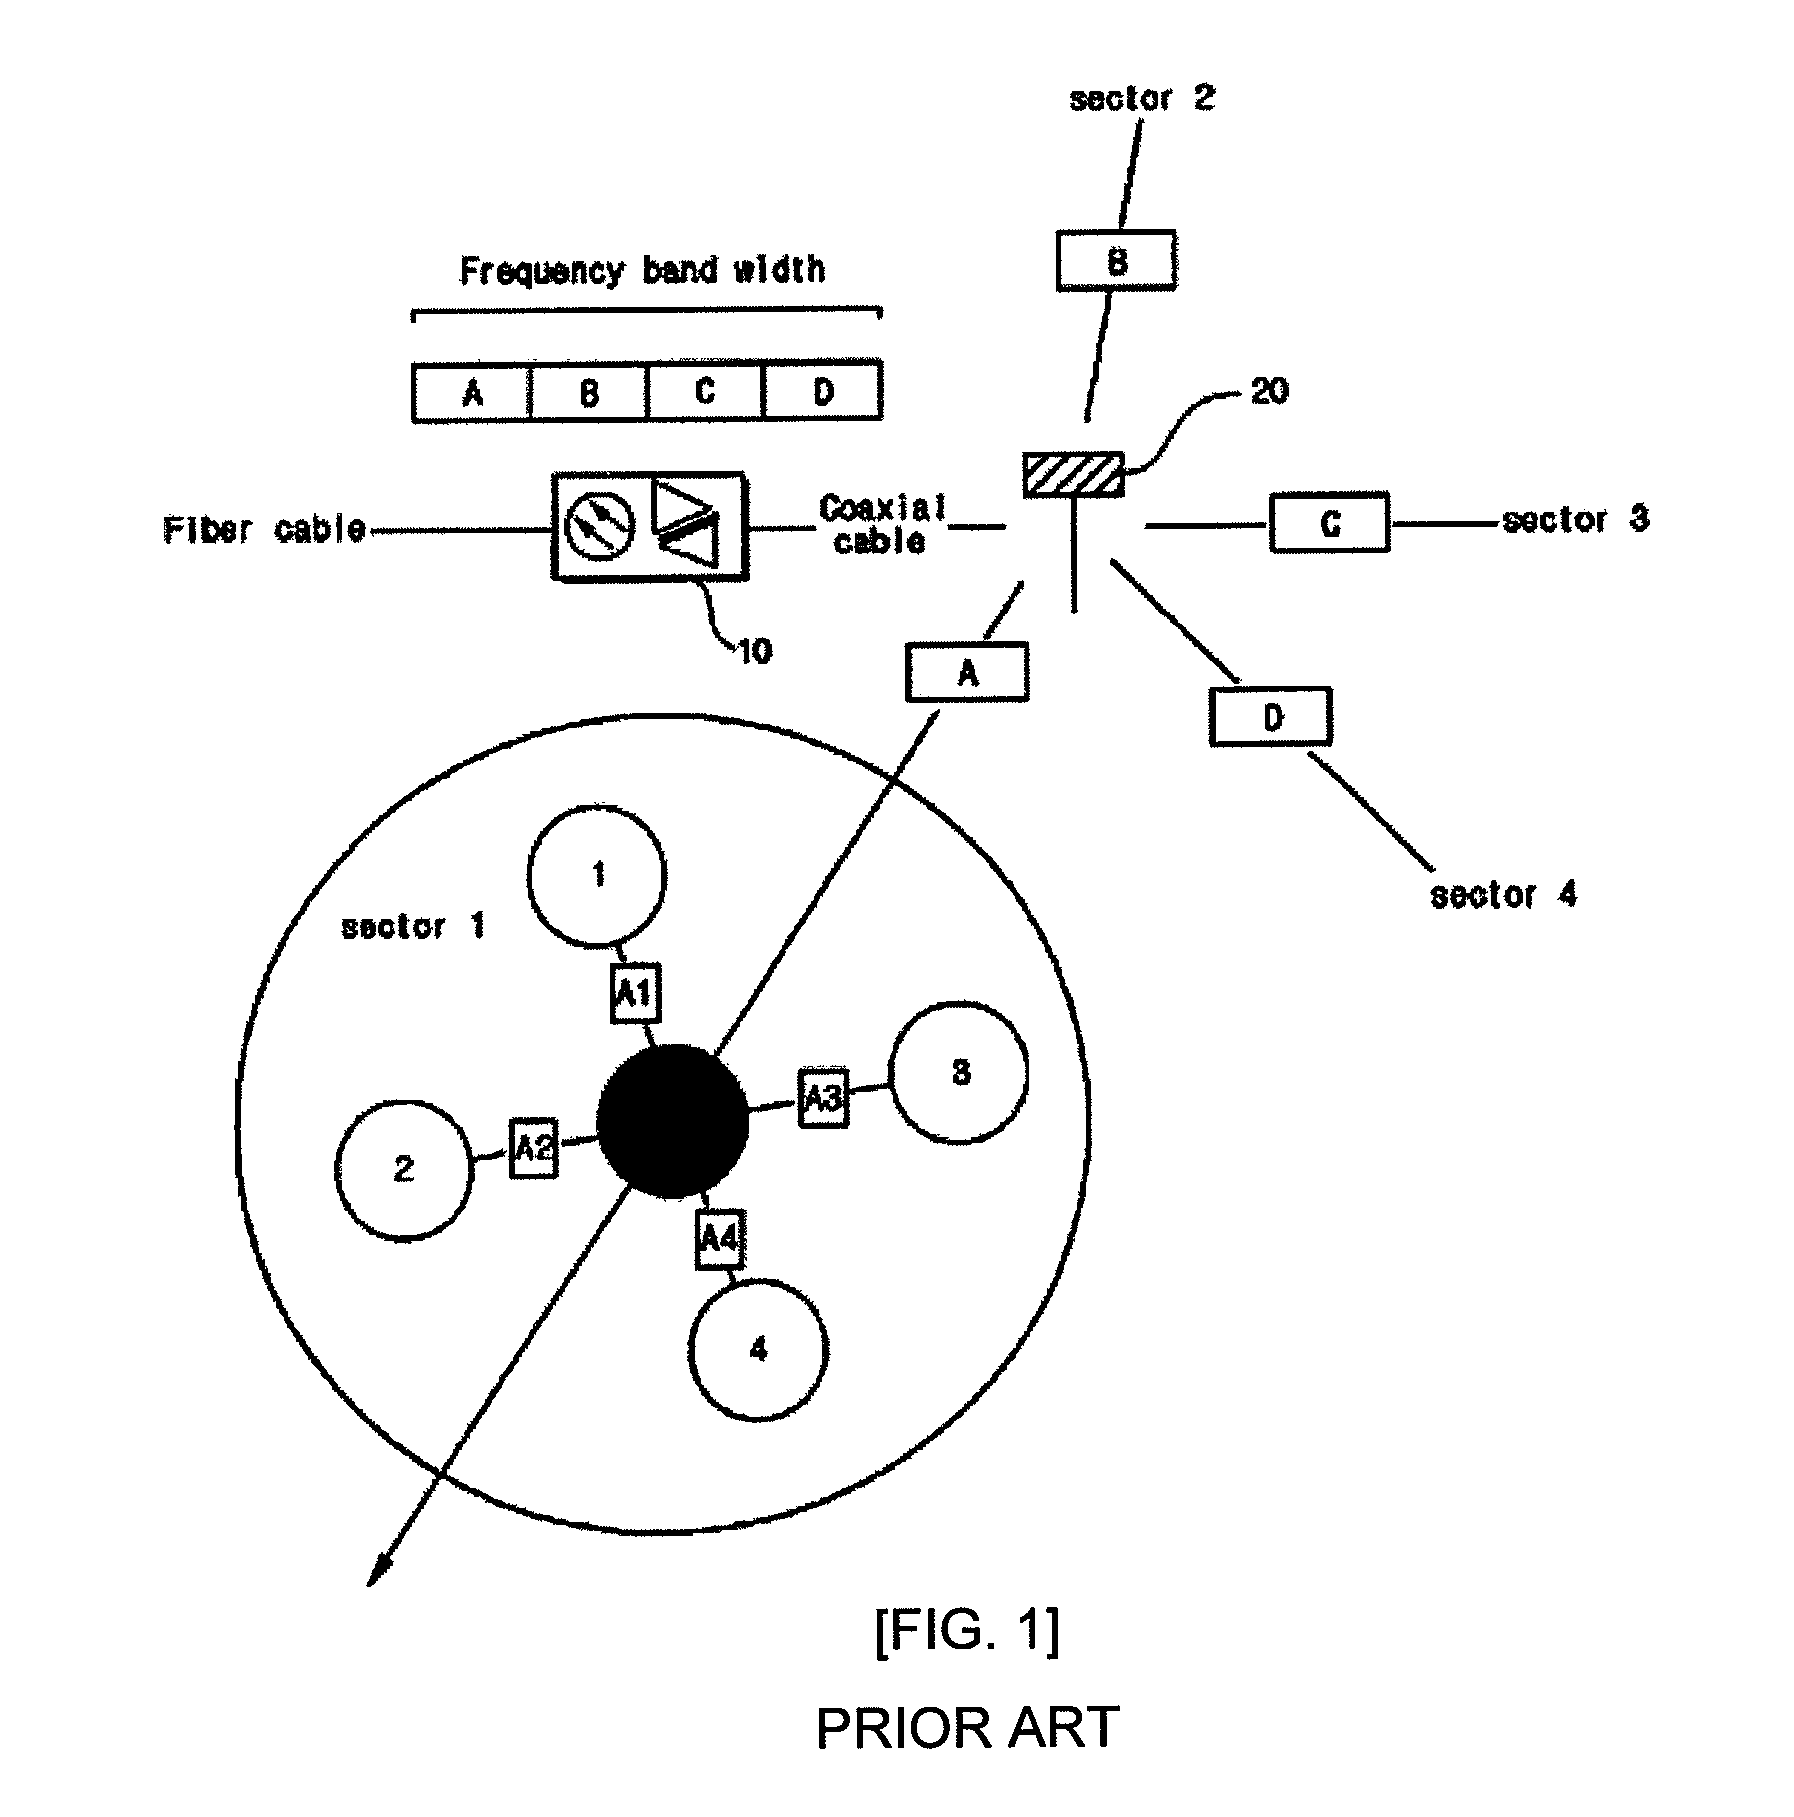 Multi-channel generating system on wired network